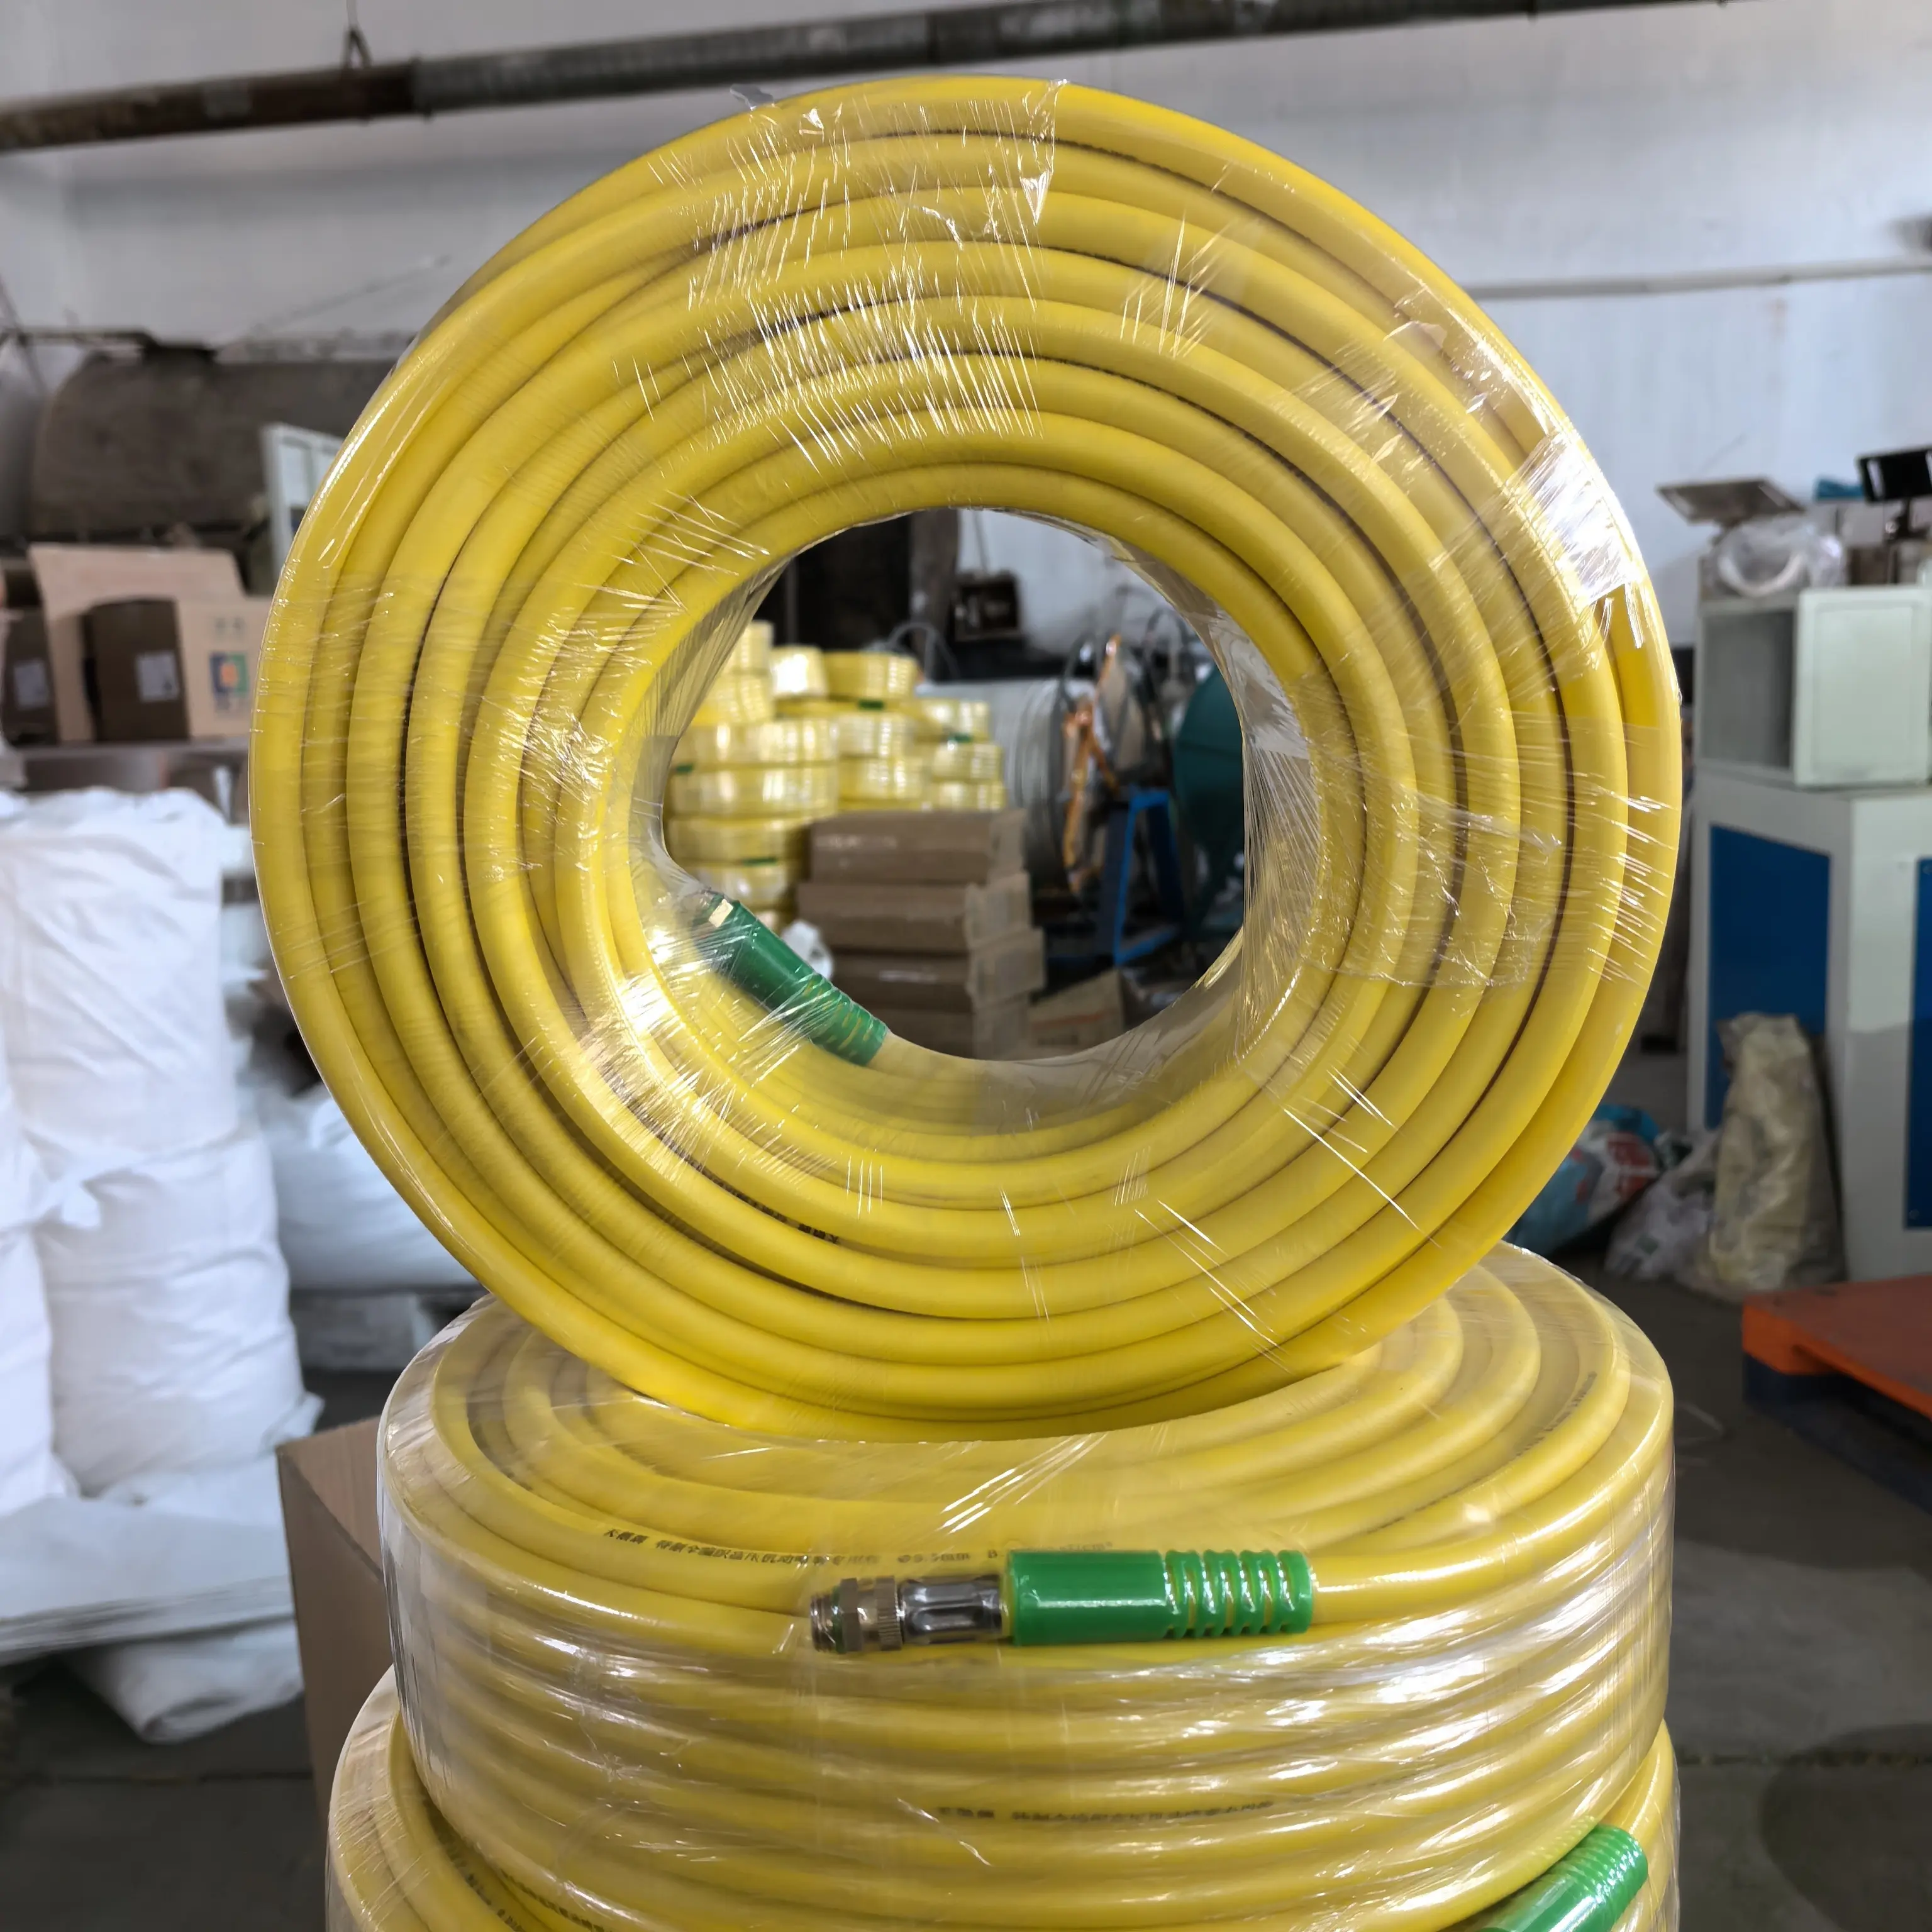 New Hot Selling Products Expandable Water Pressure Hose With Spray Nozzle Agricultural Air Spray Pipe Tube Hose